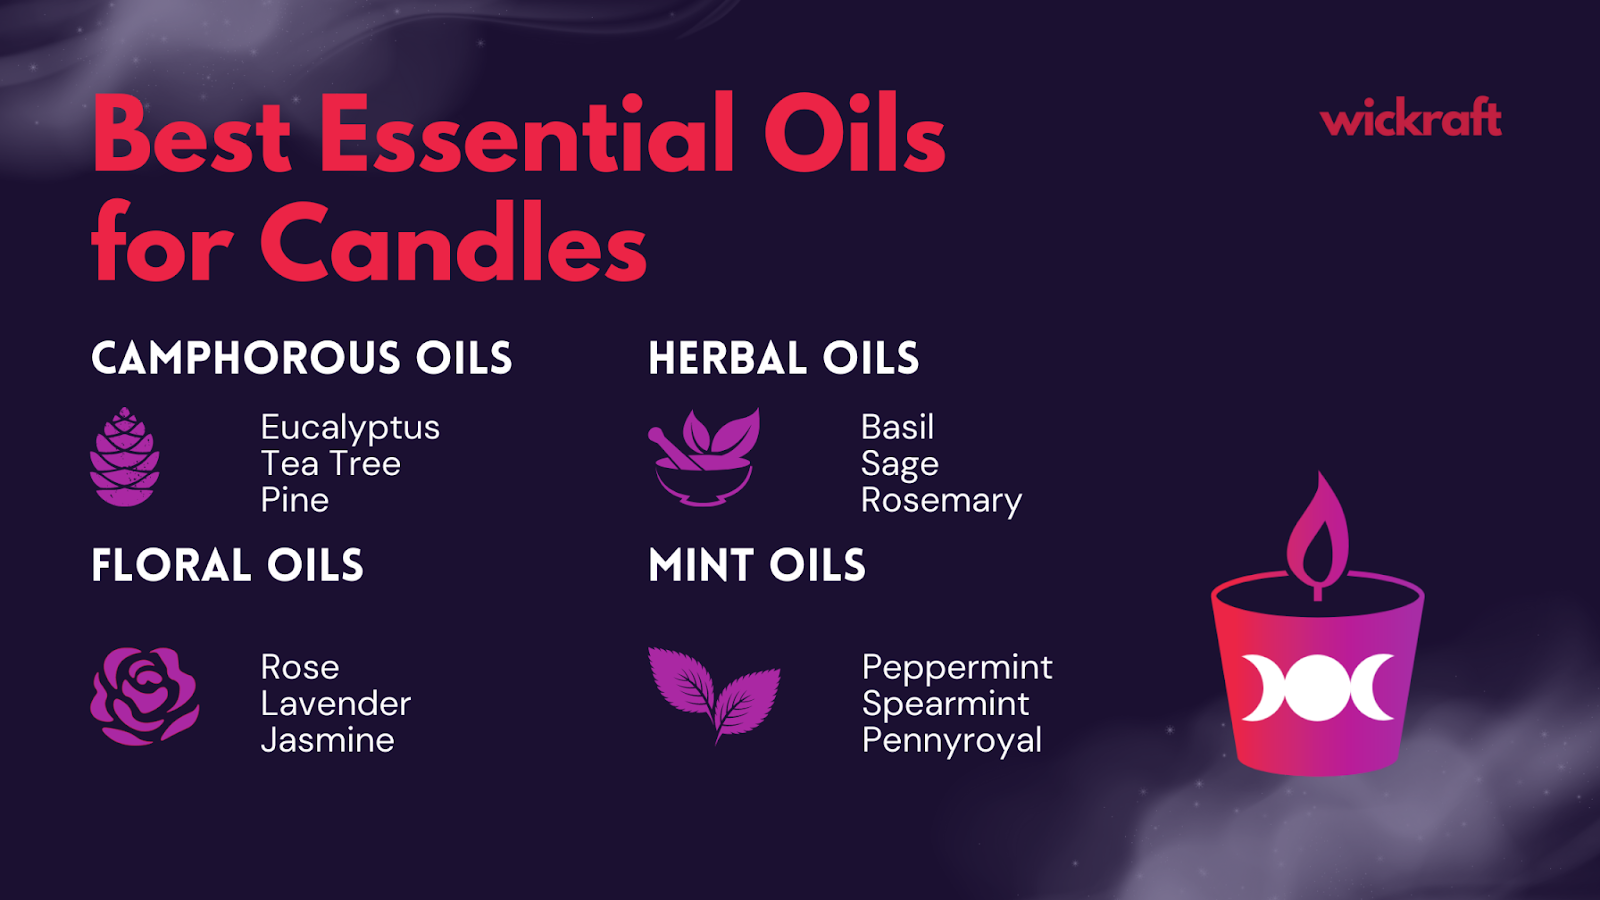 Candle Making with this Essential Oil: The Best Essential Oils for Can